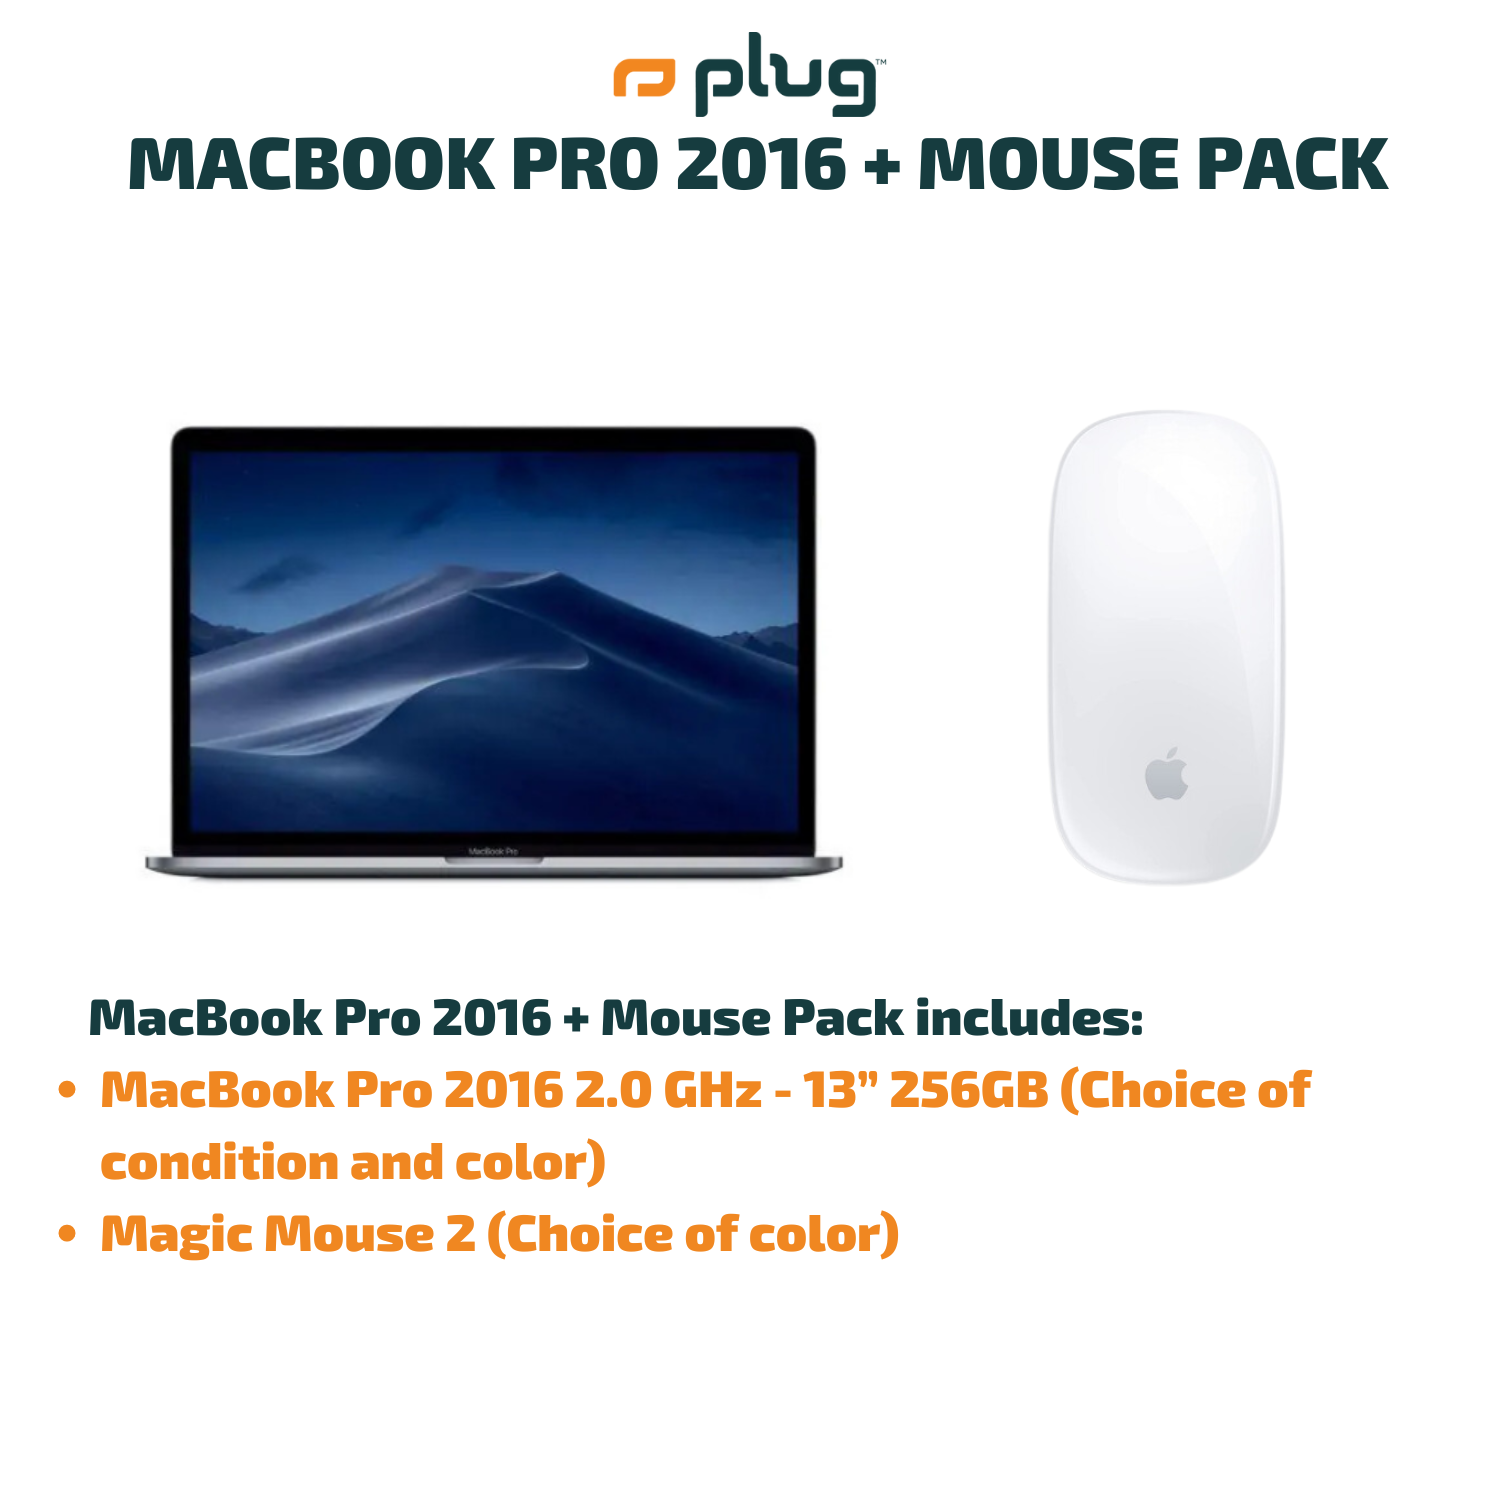 MacBook Pro 2016 + Mouse Pack